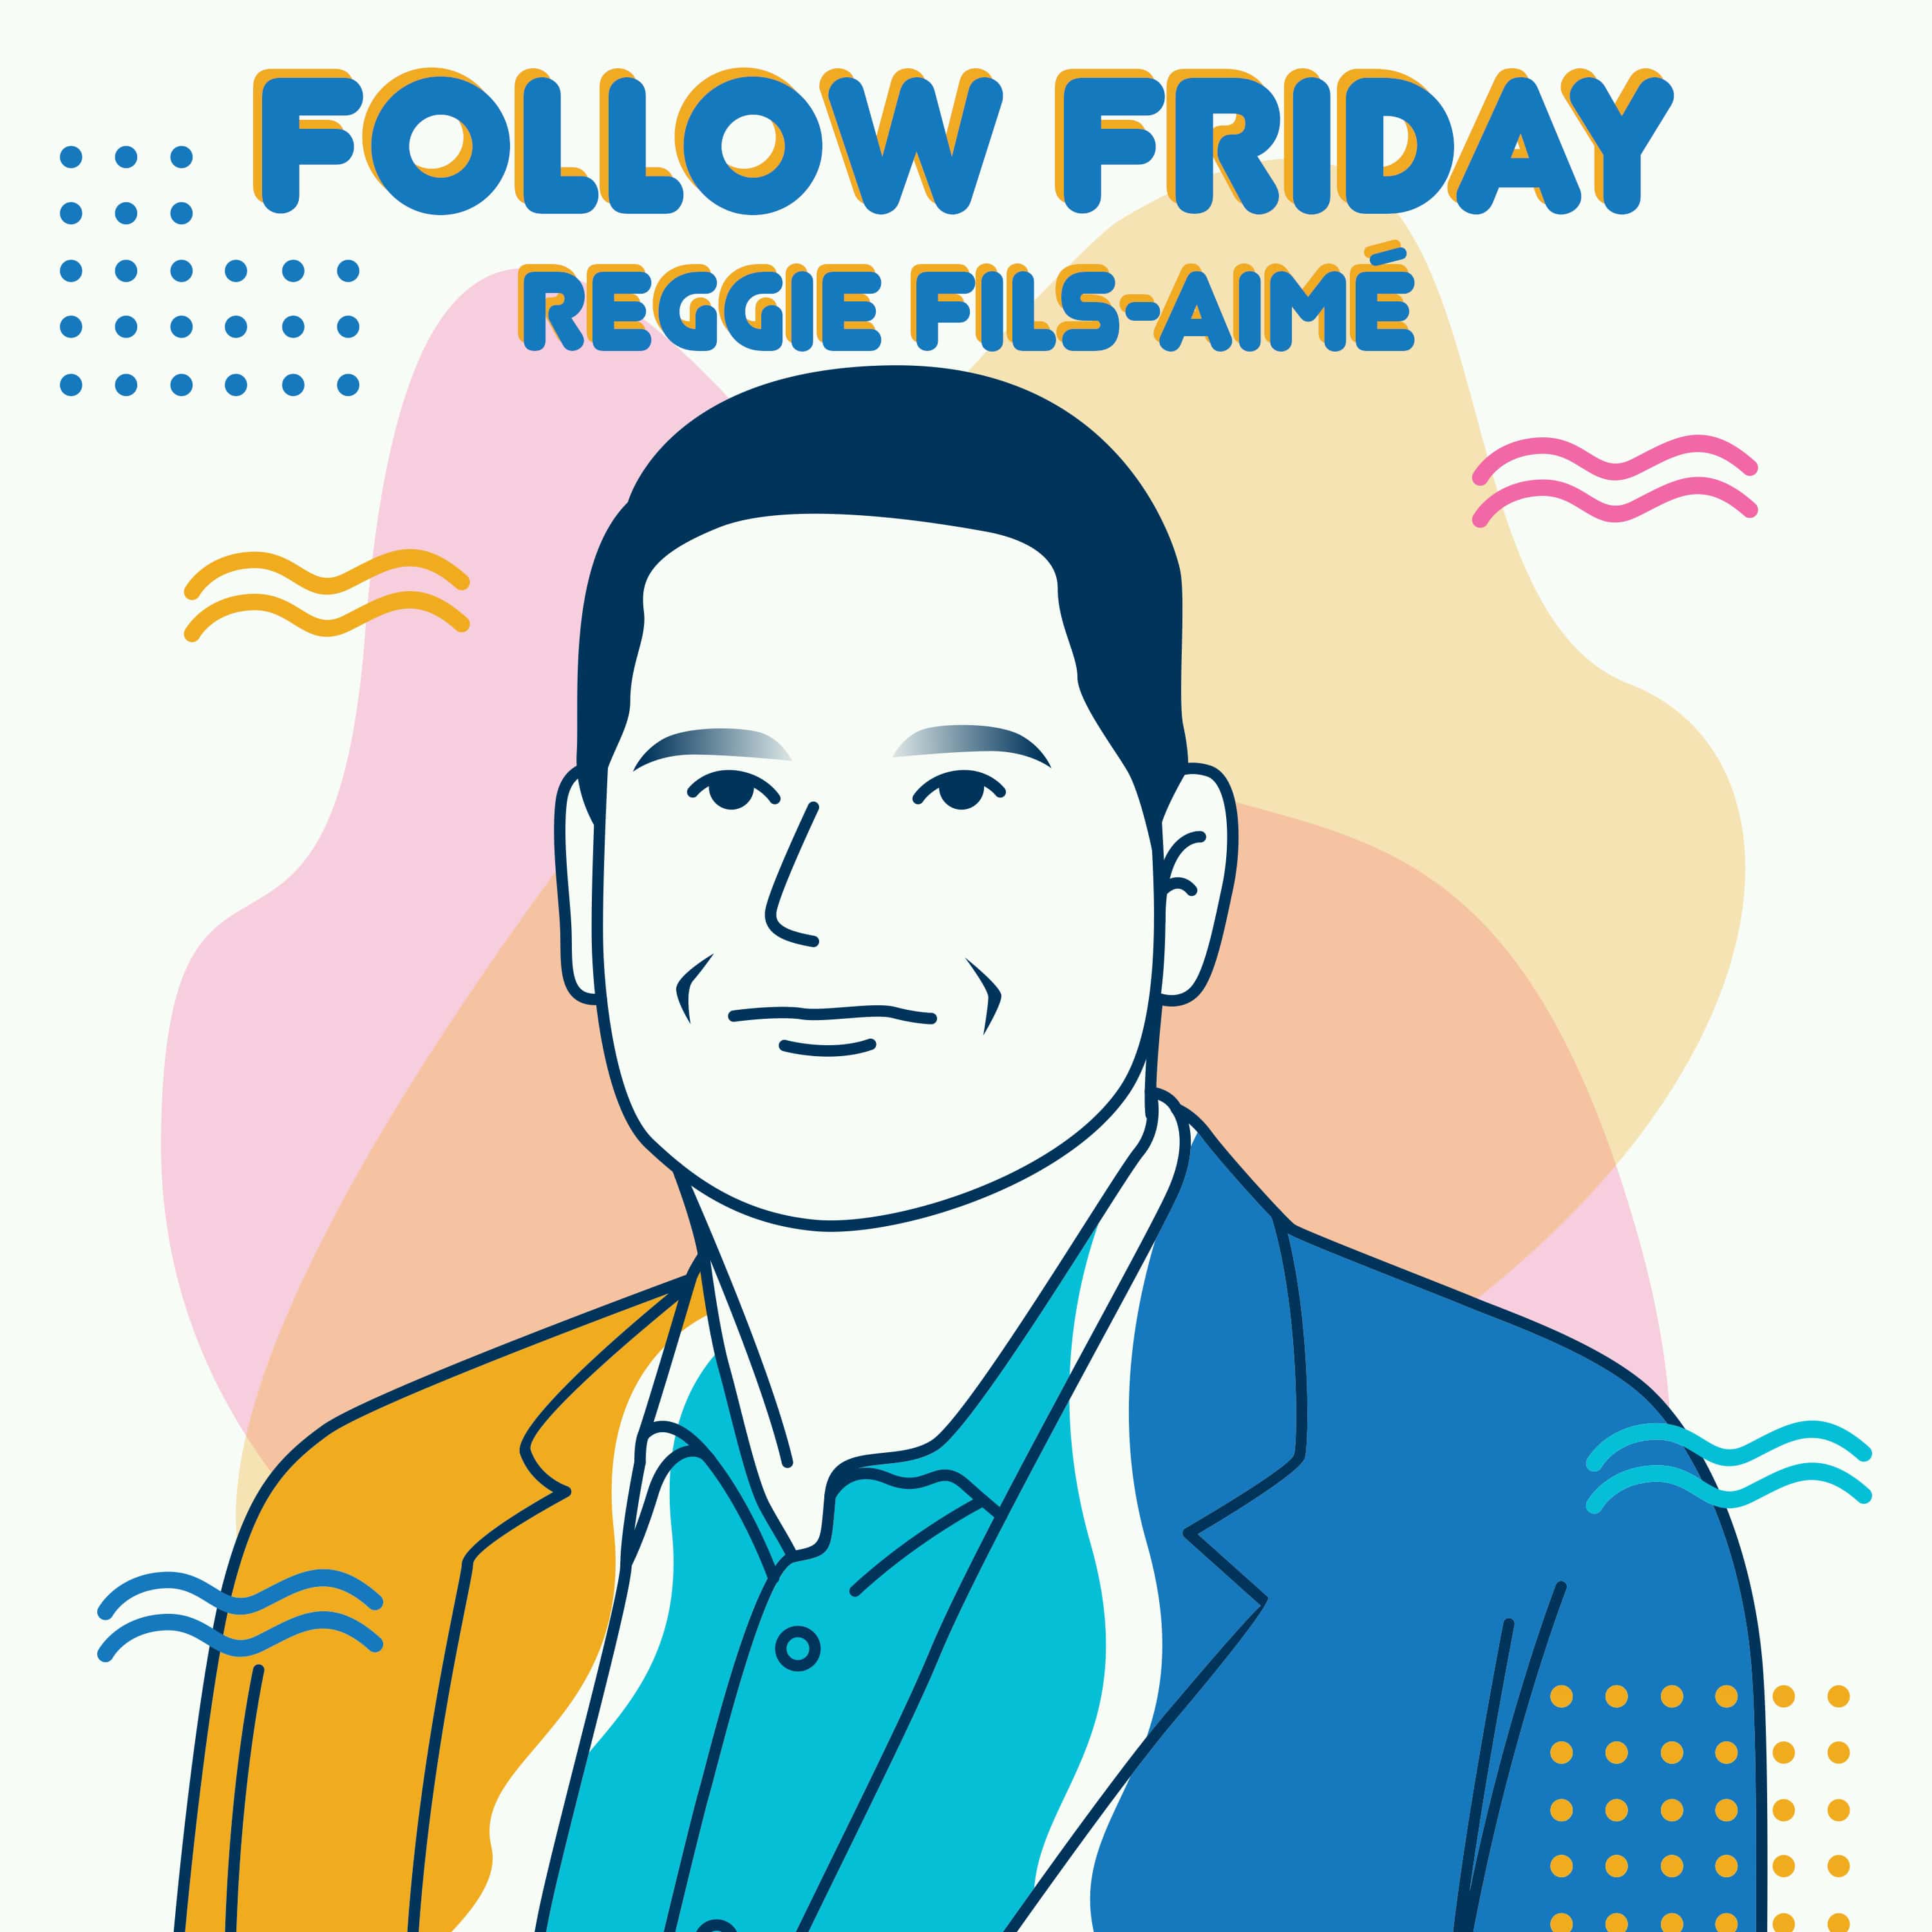 #60 Reggie Fils-Aimé (Disrupting the Game): Becoming a meme, becoming a Muppet, video game skills